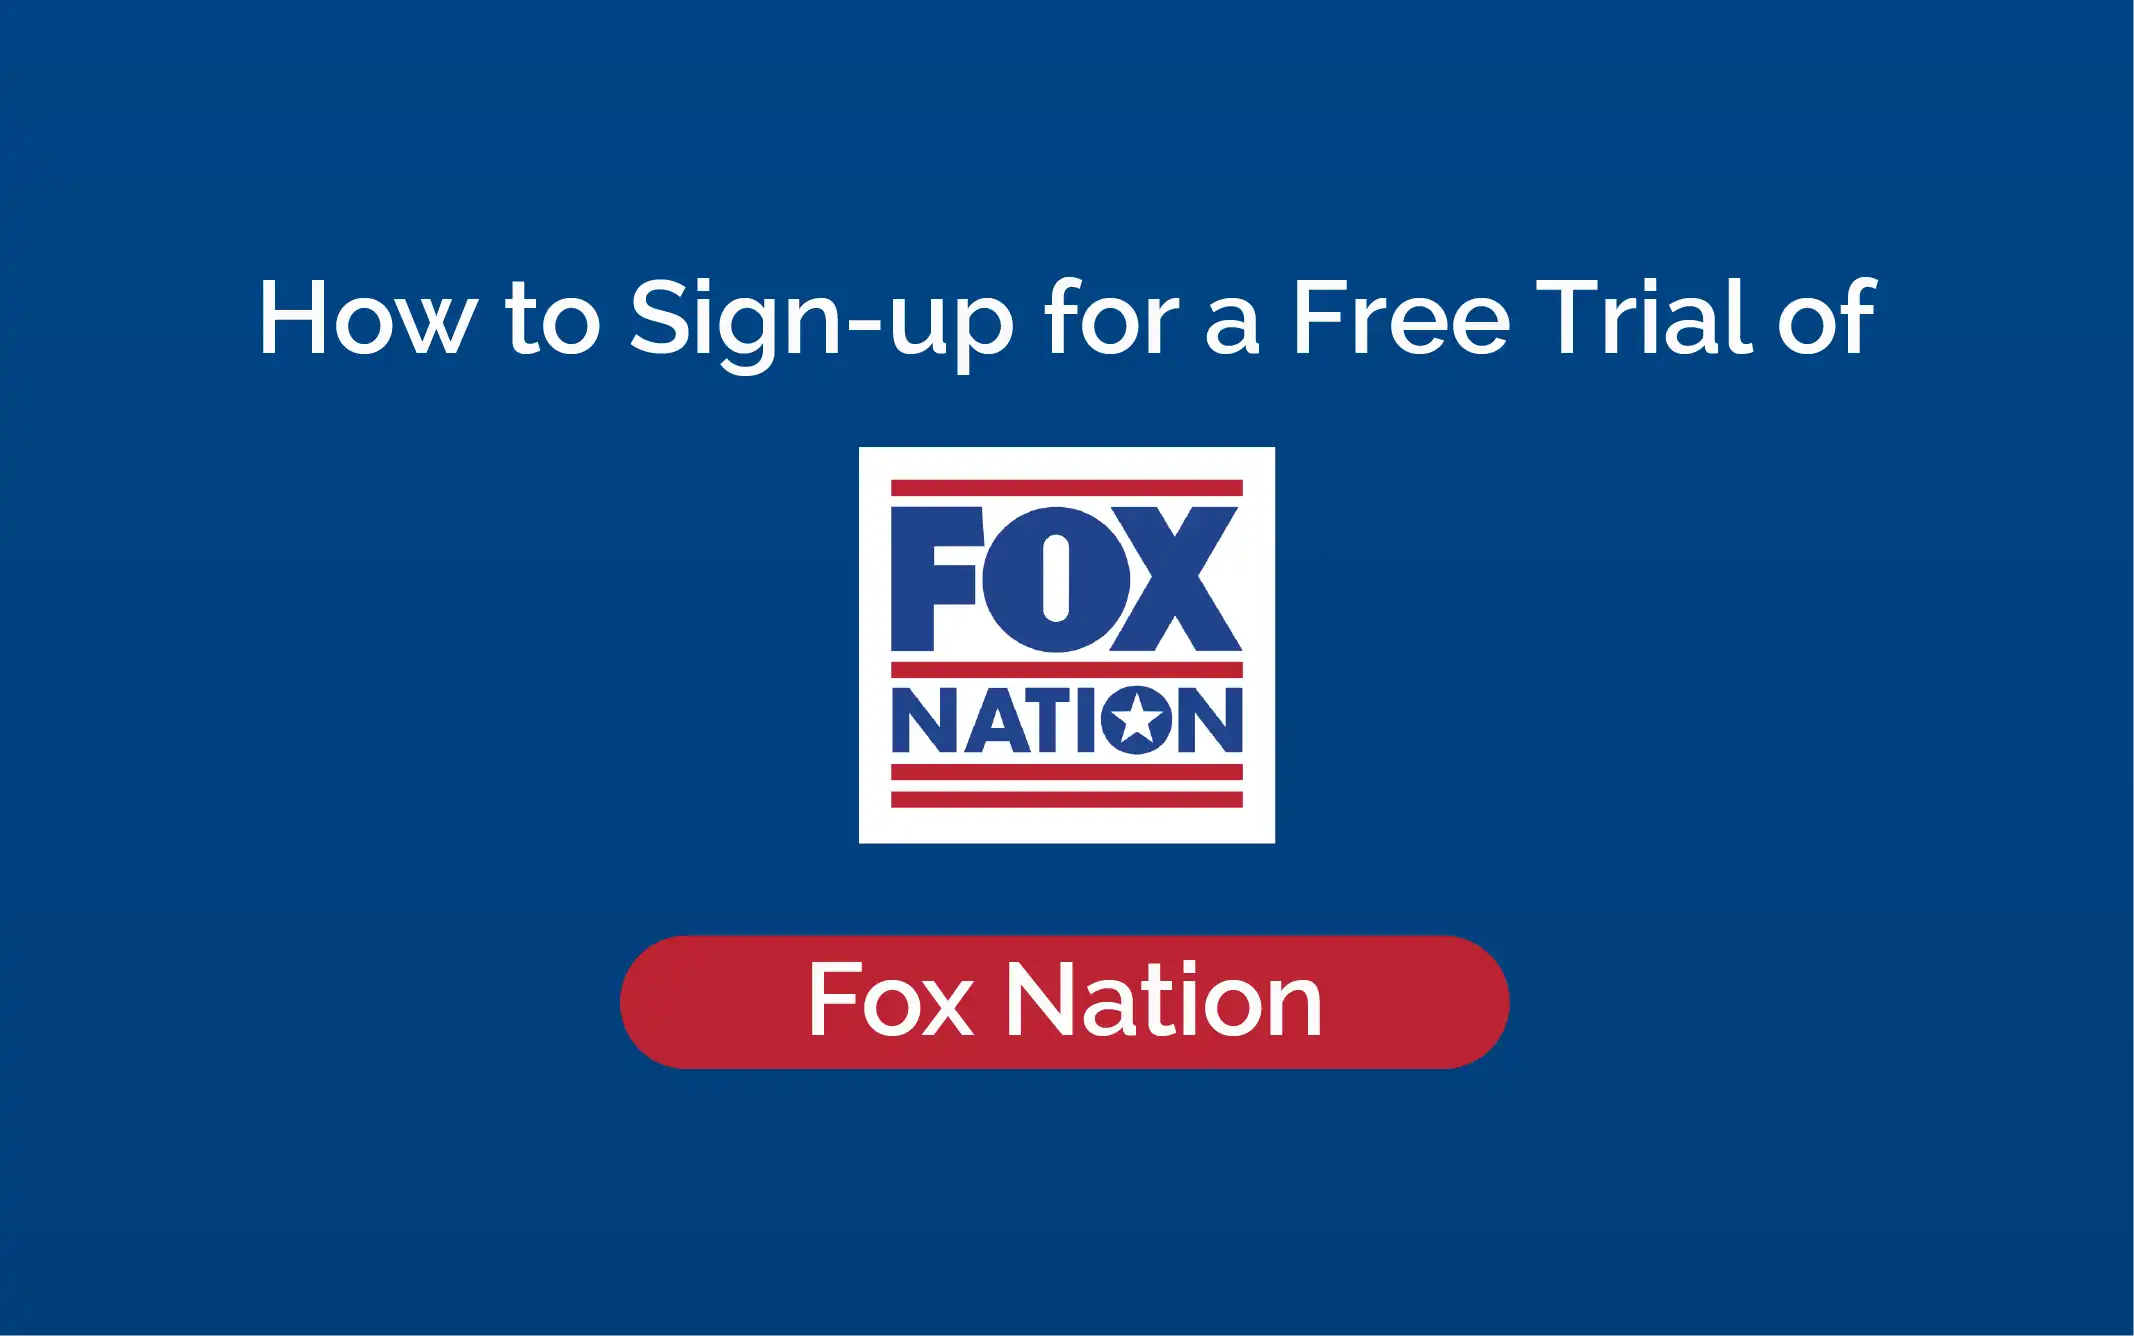 How To Sign Up For A 7-Day Free Trial Of Fox Nation